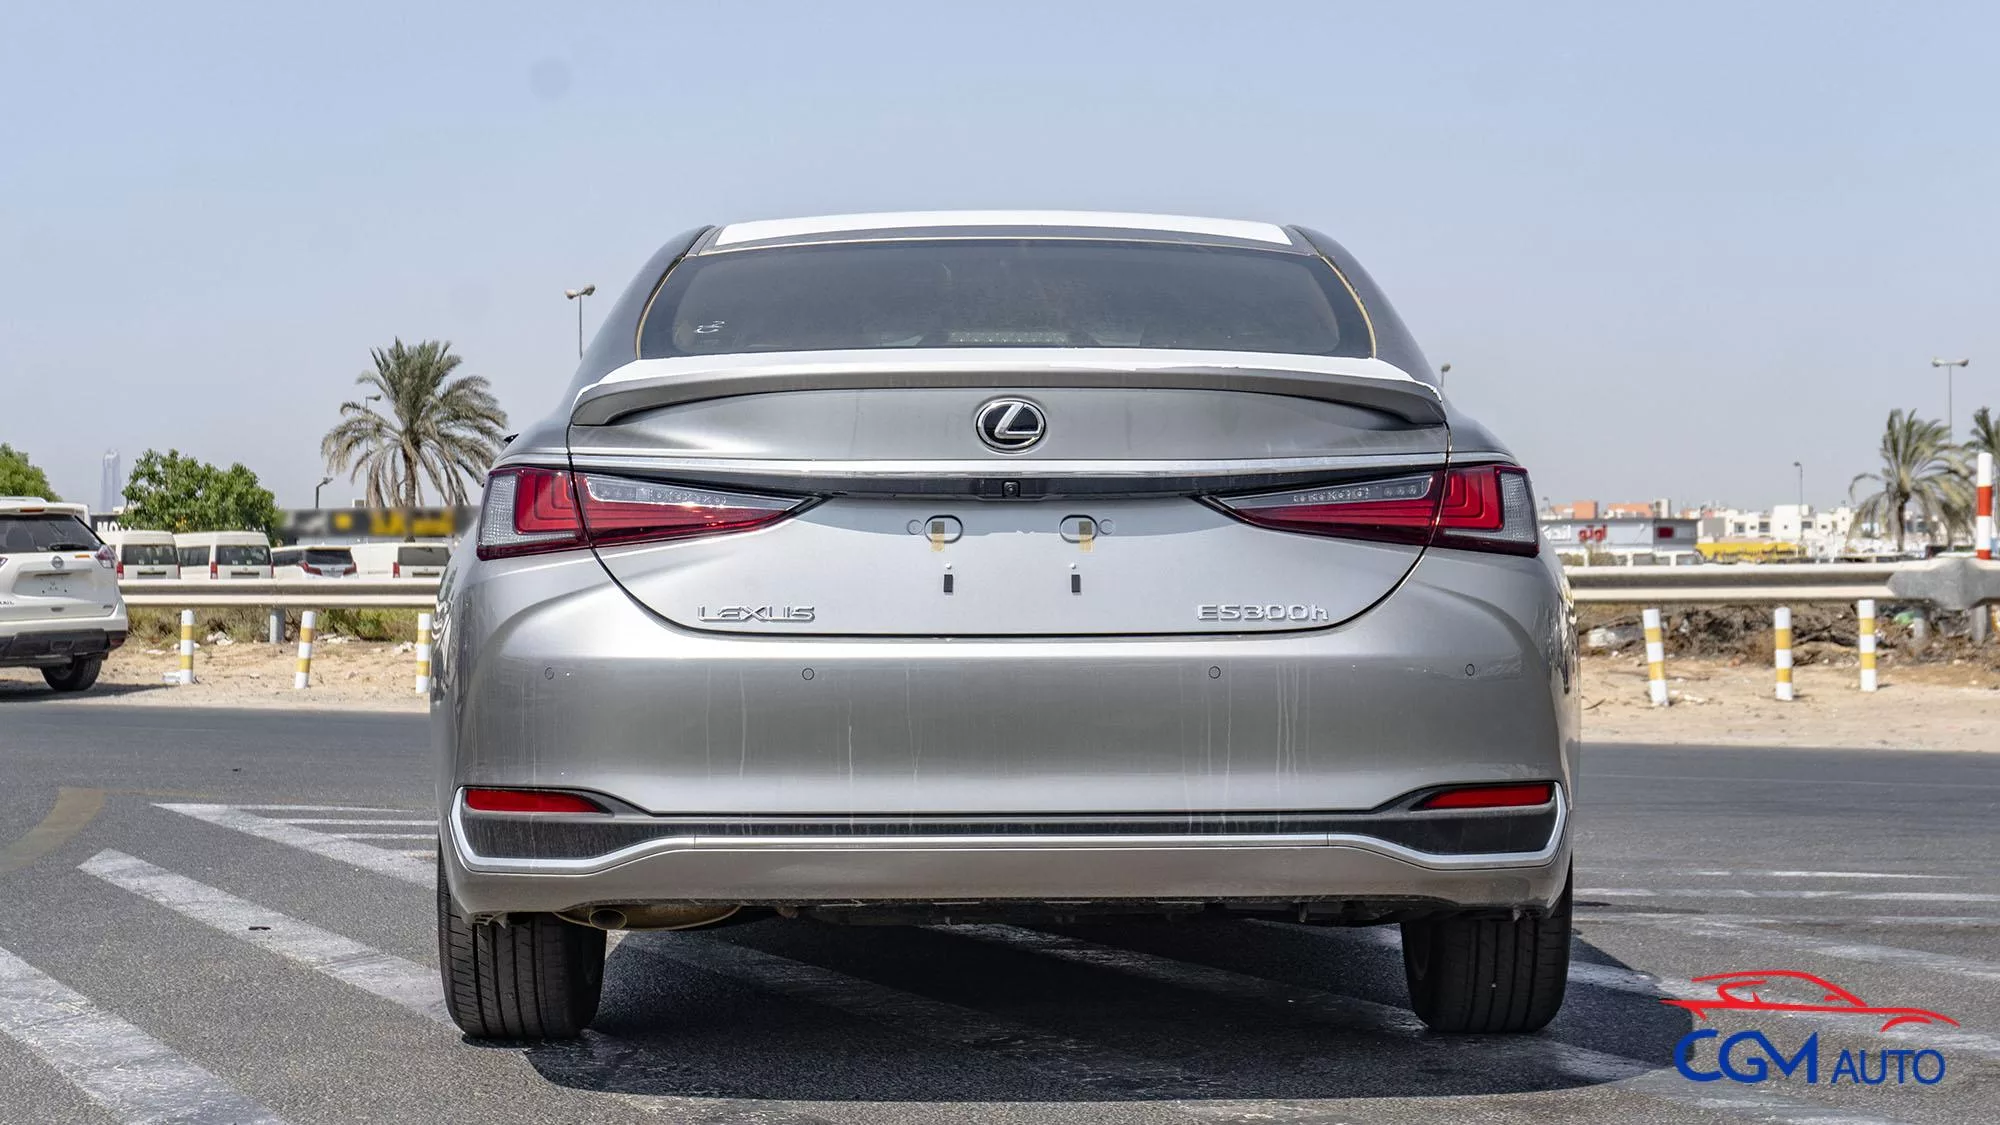 Lexus ES300H new cars selling 2023 2024 | Explore Exciting New Car Deals for Sale in UAE, Dubai, Sharjah, and Abu Dhabi | Offers